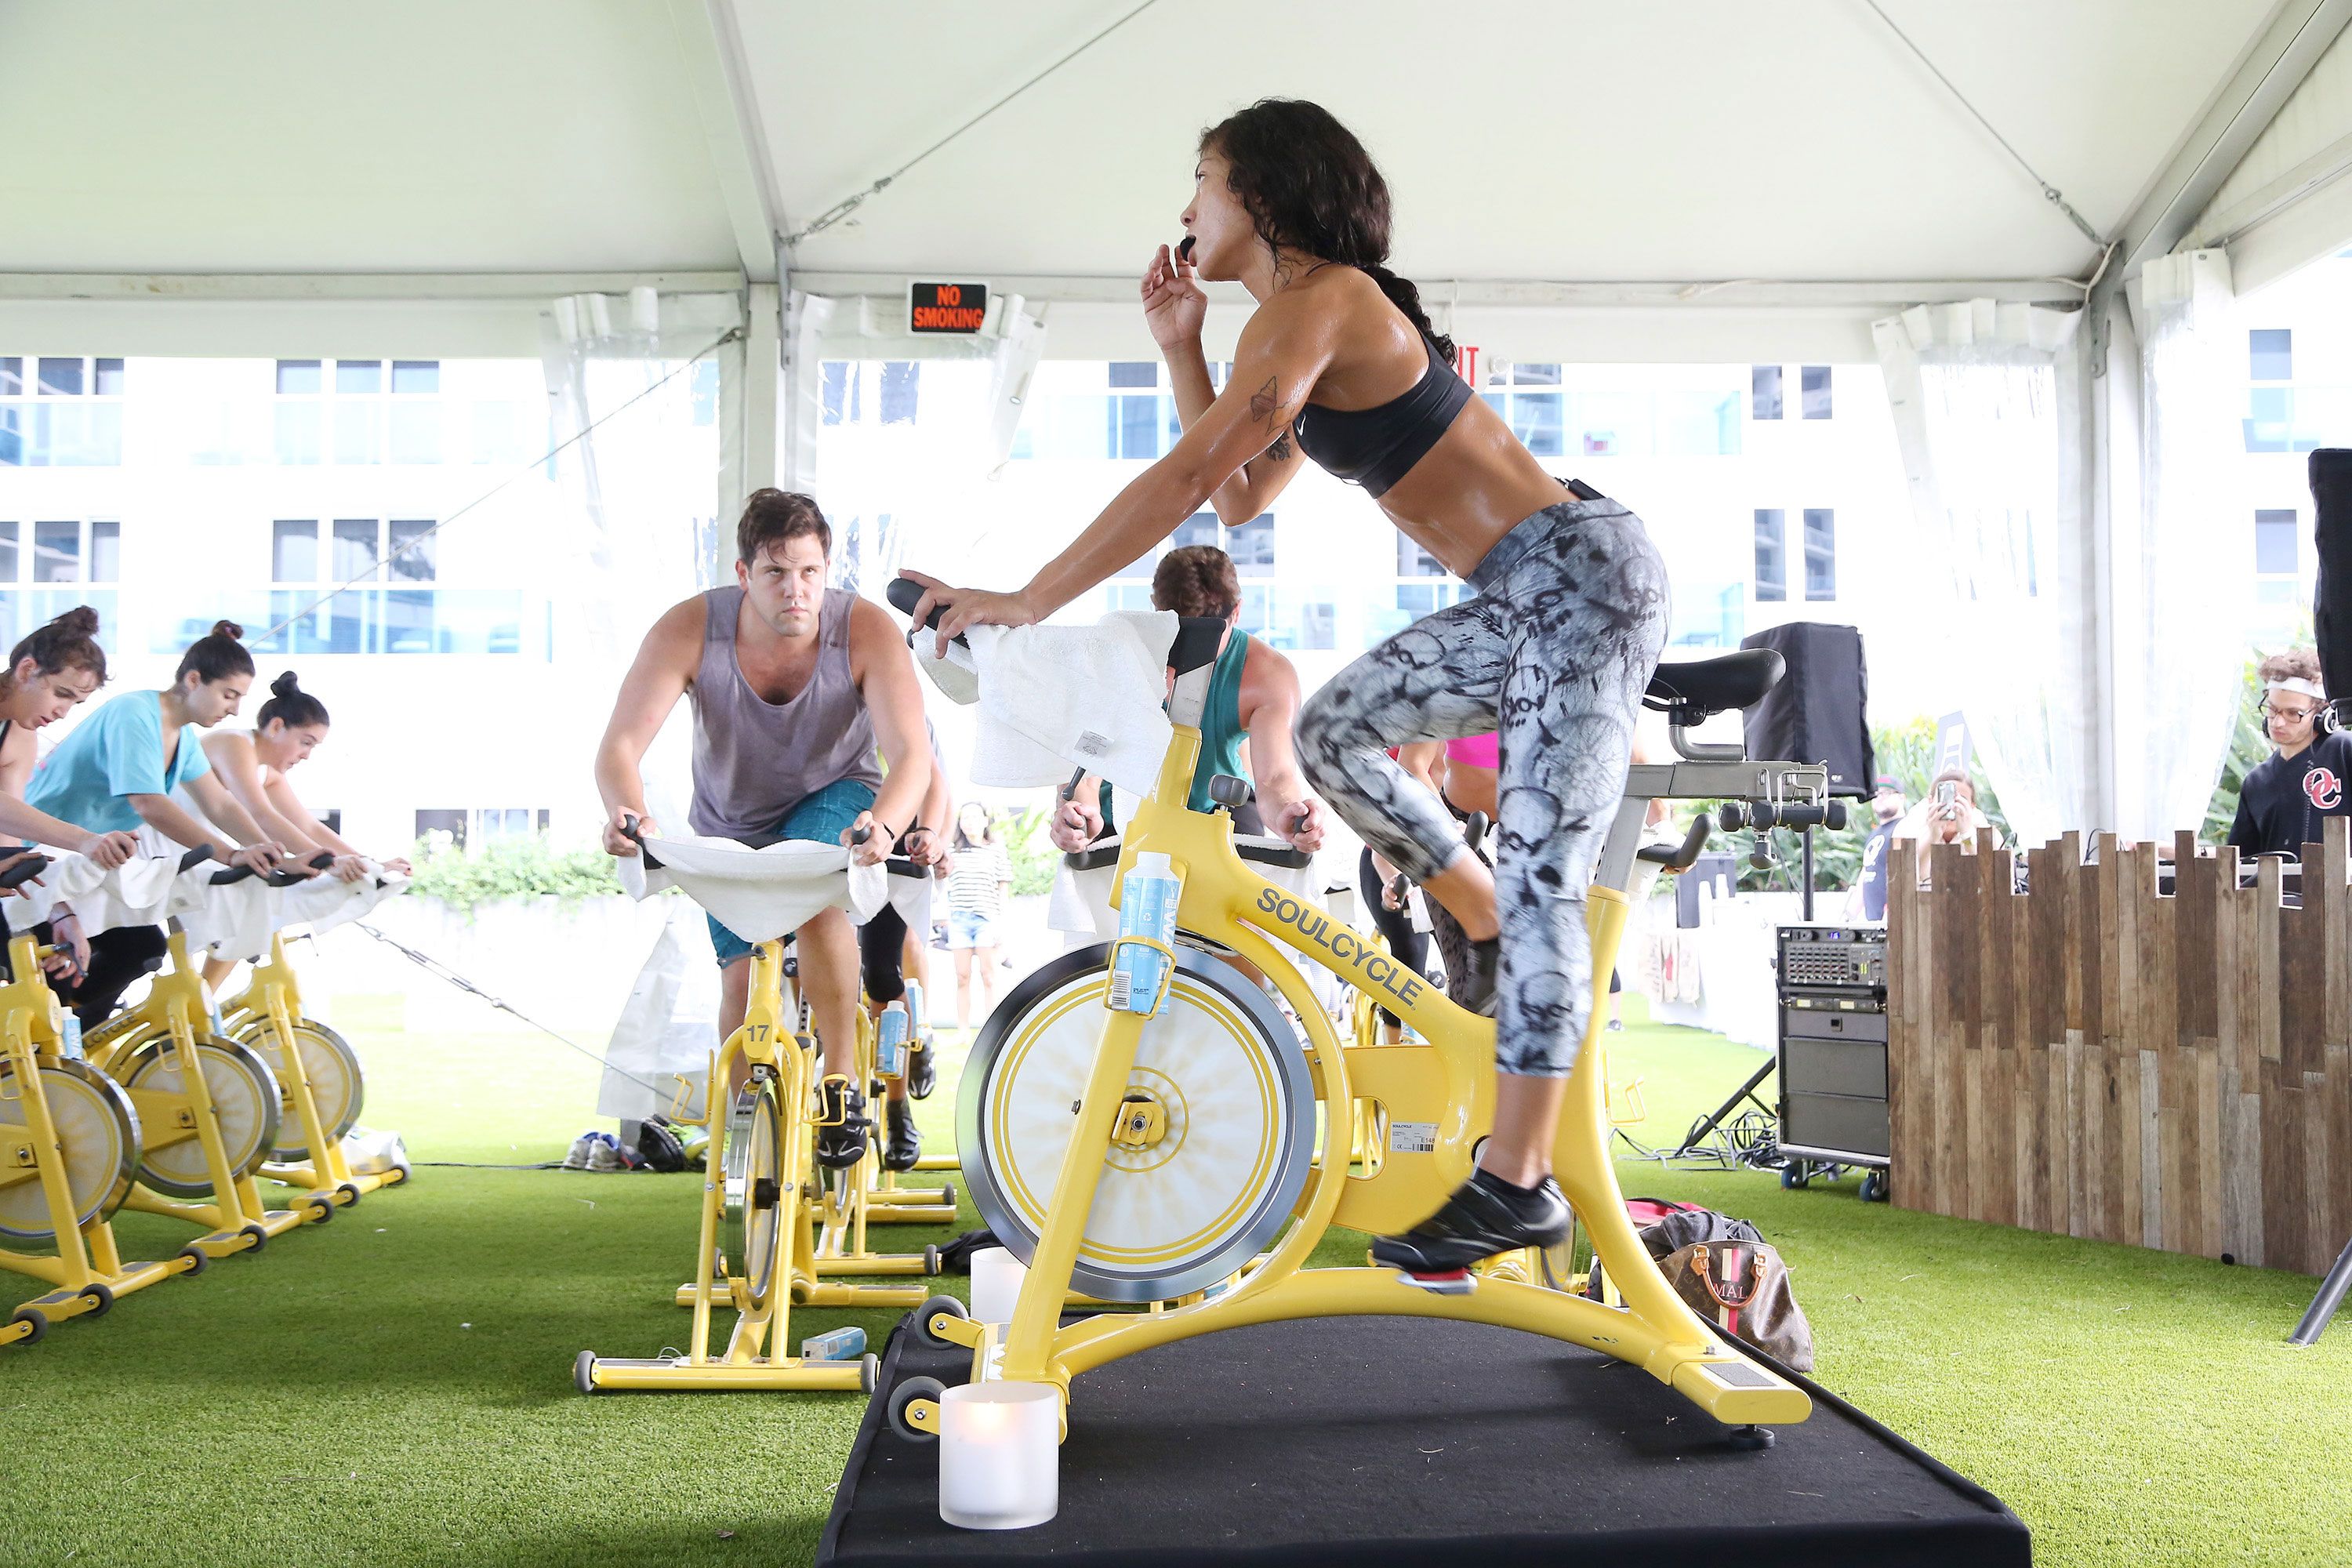 soulcycle virtual classes